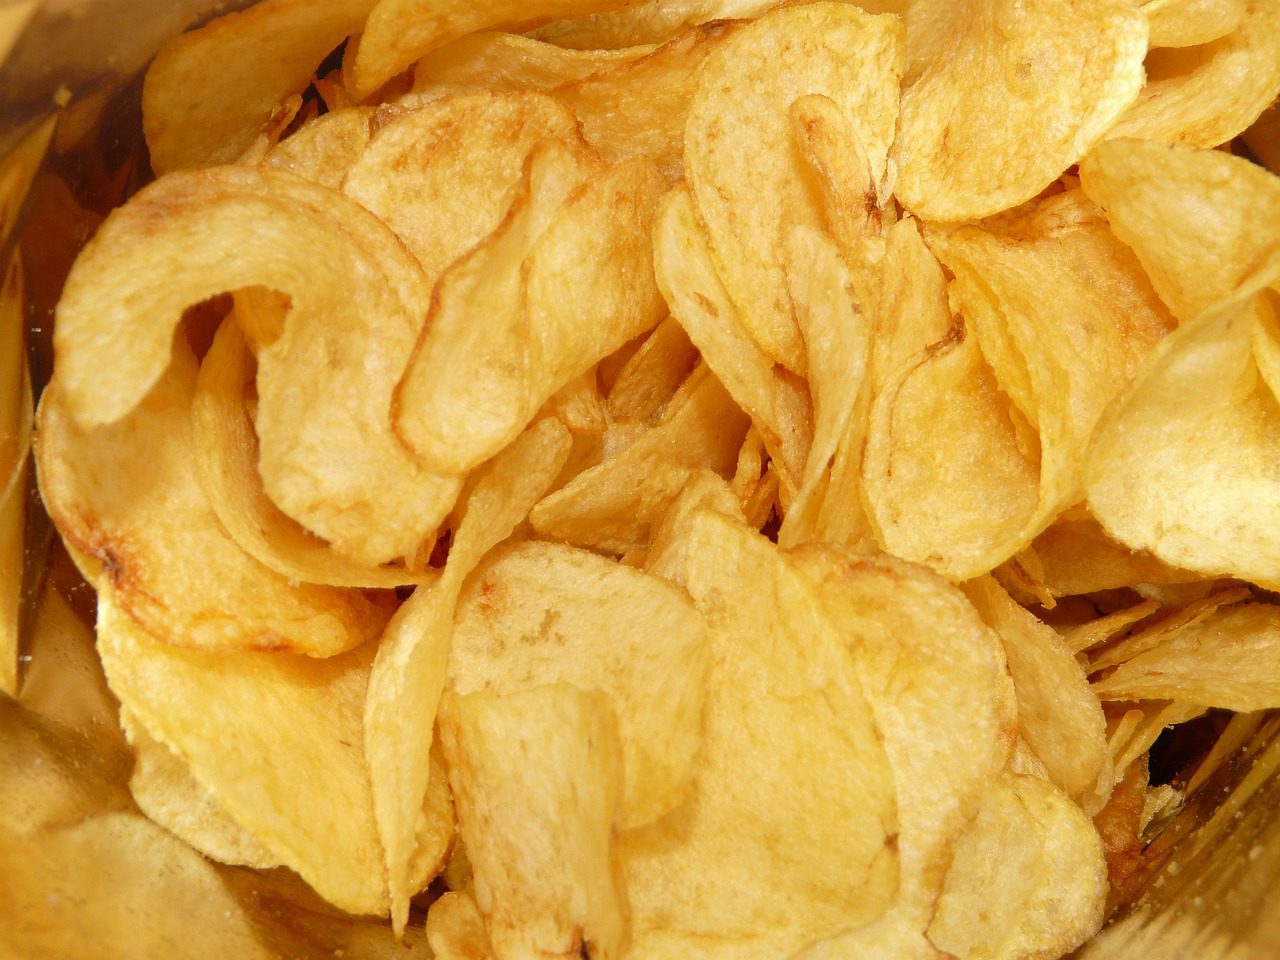 A close up of some potato chips